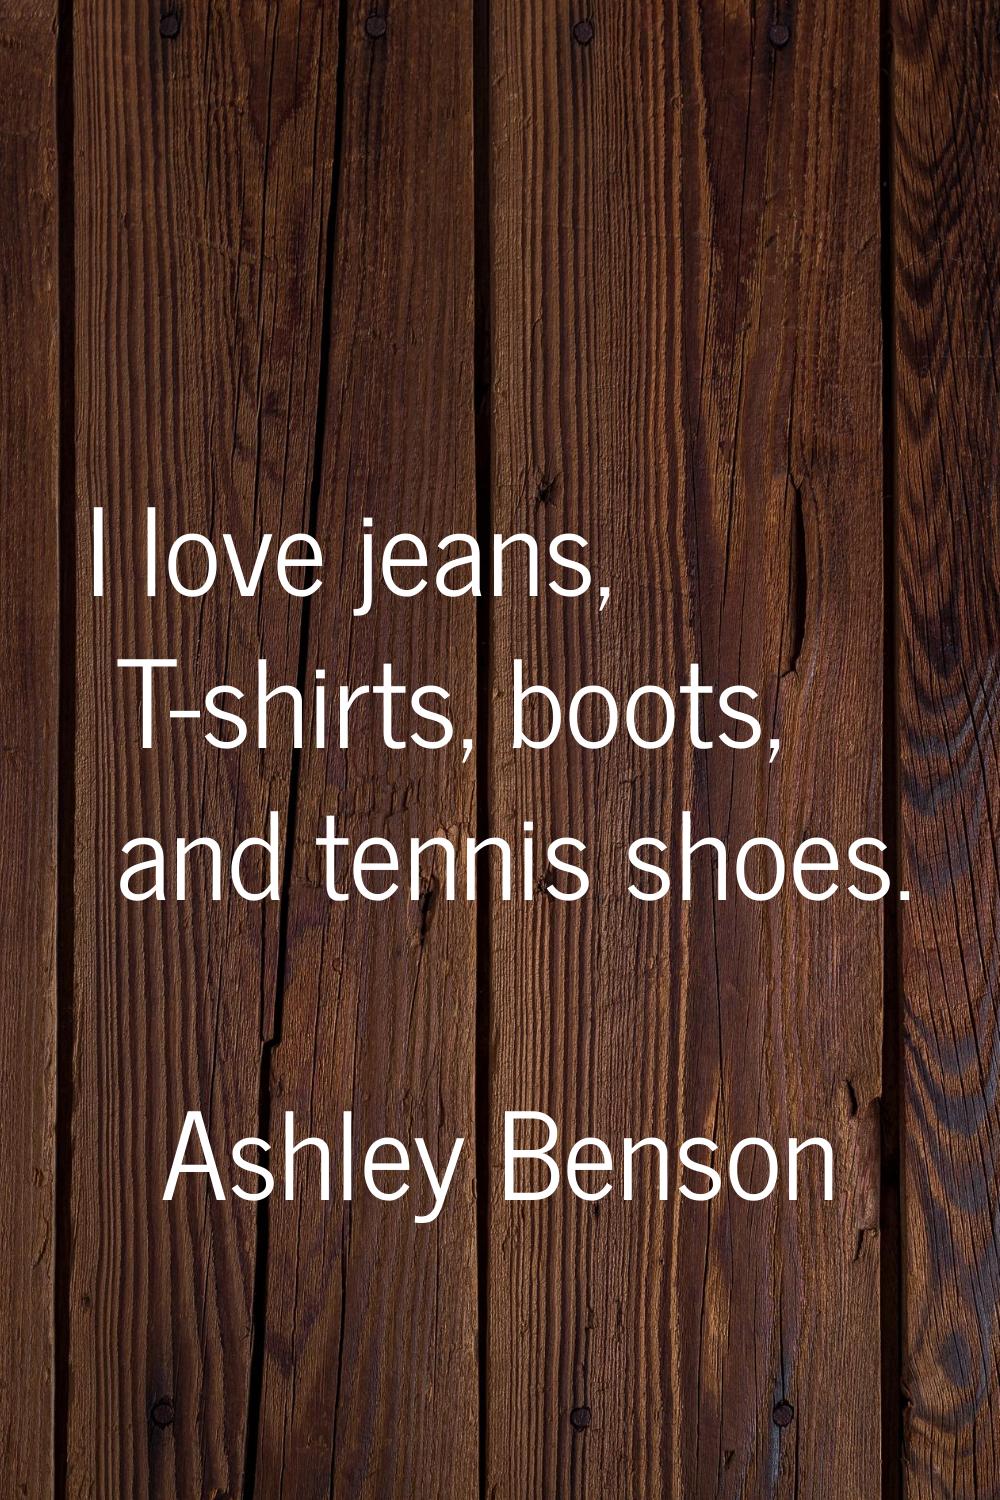 I love jeans, T-shirts, boots, and tennis shoes.